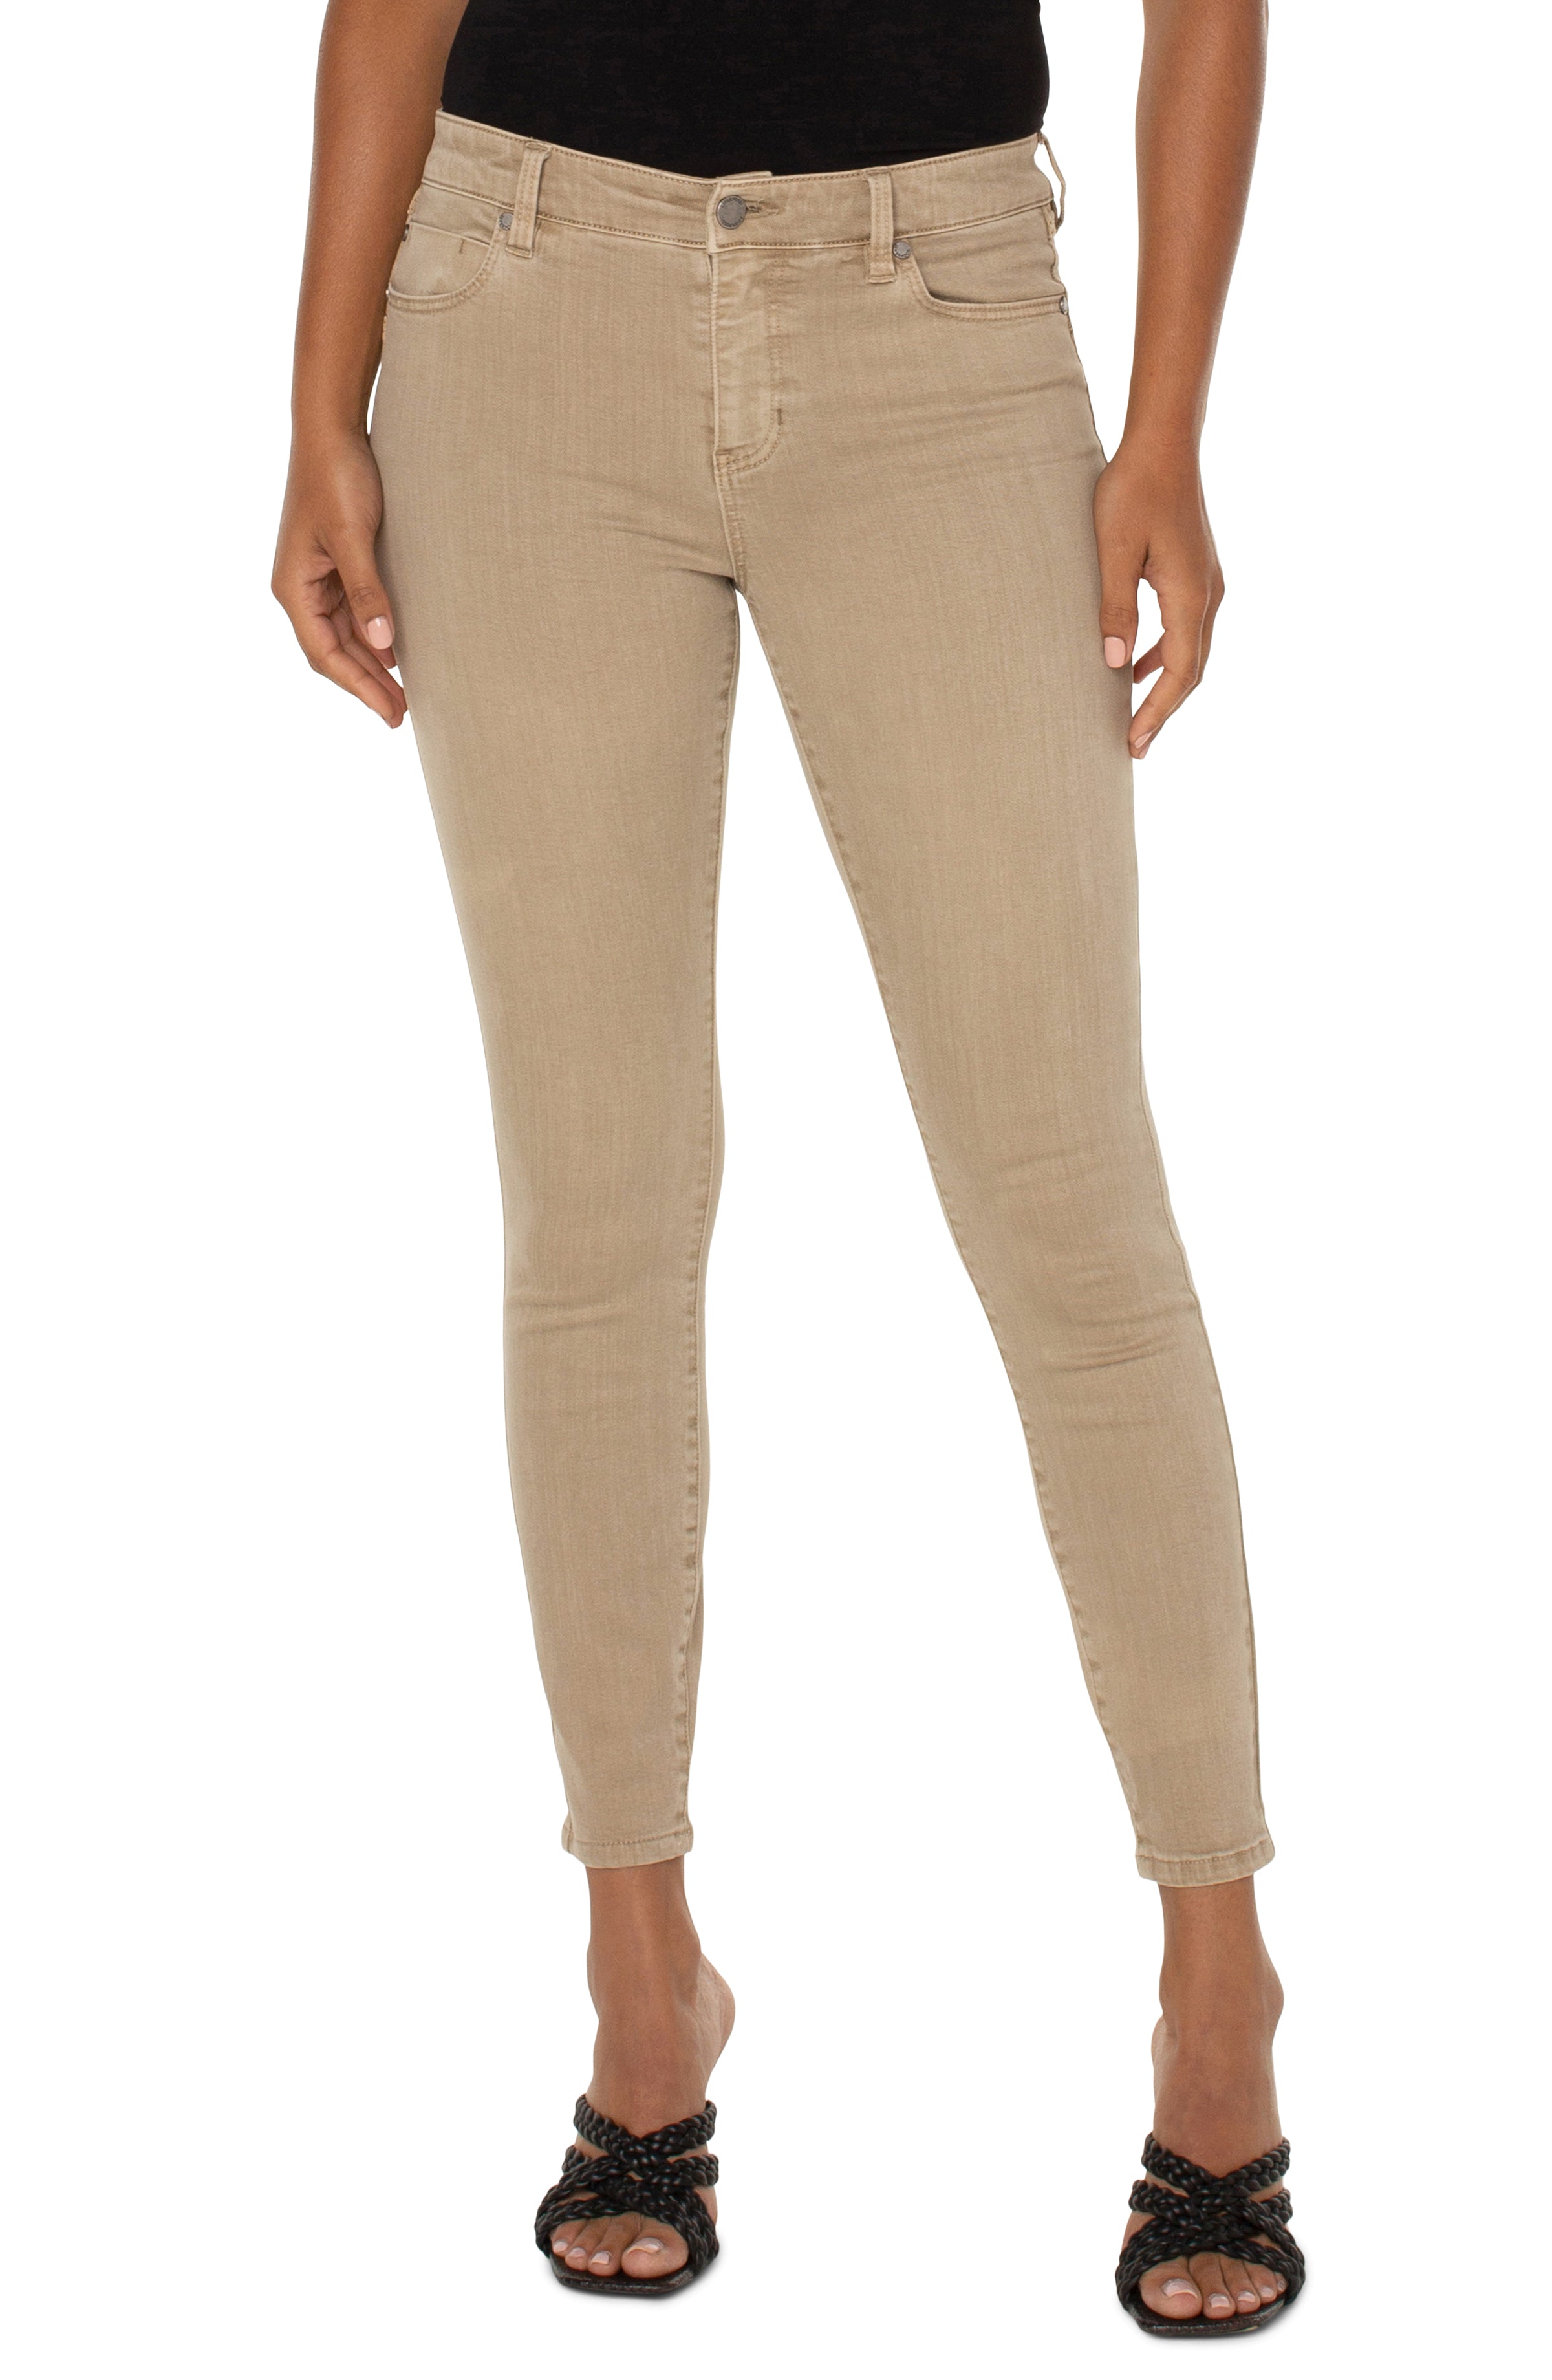 Piper Ankle Skinny - Biscuit Tan